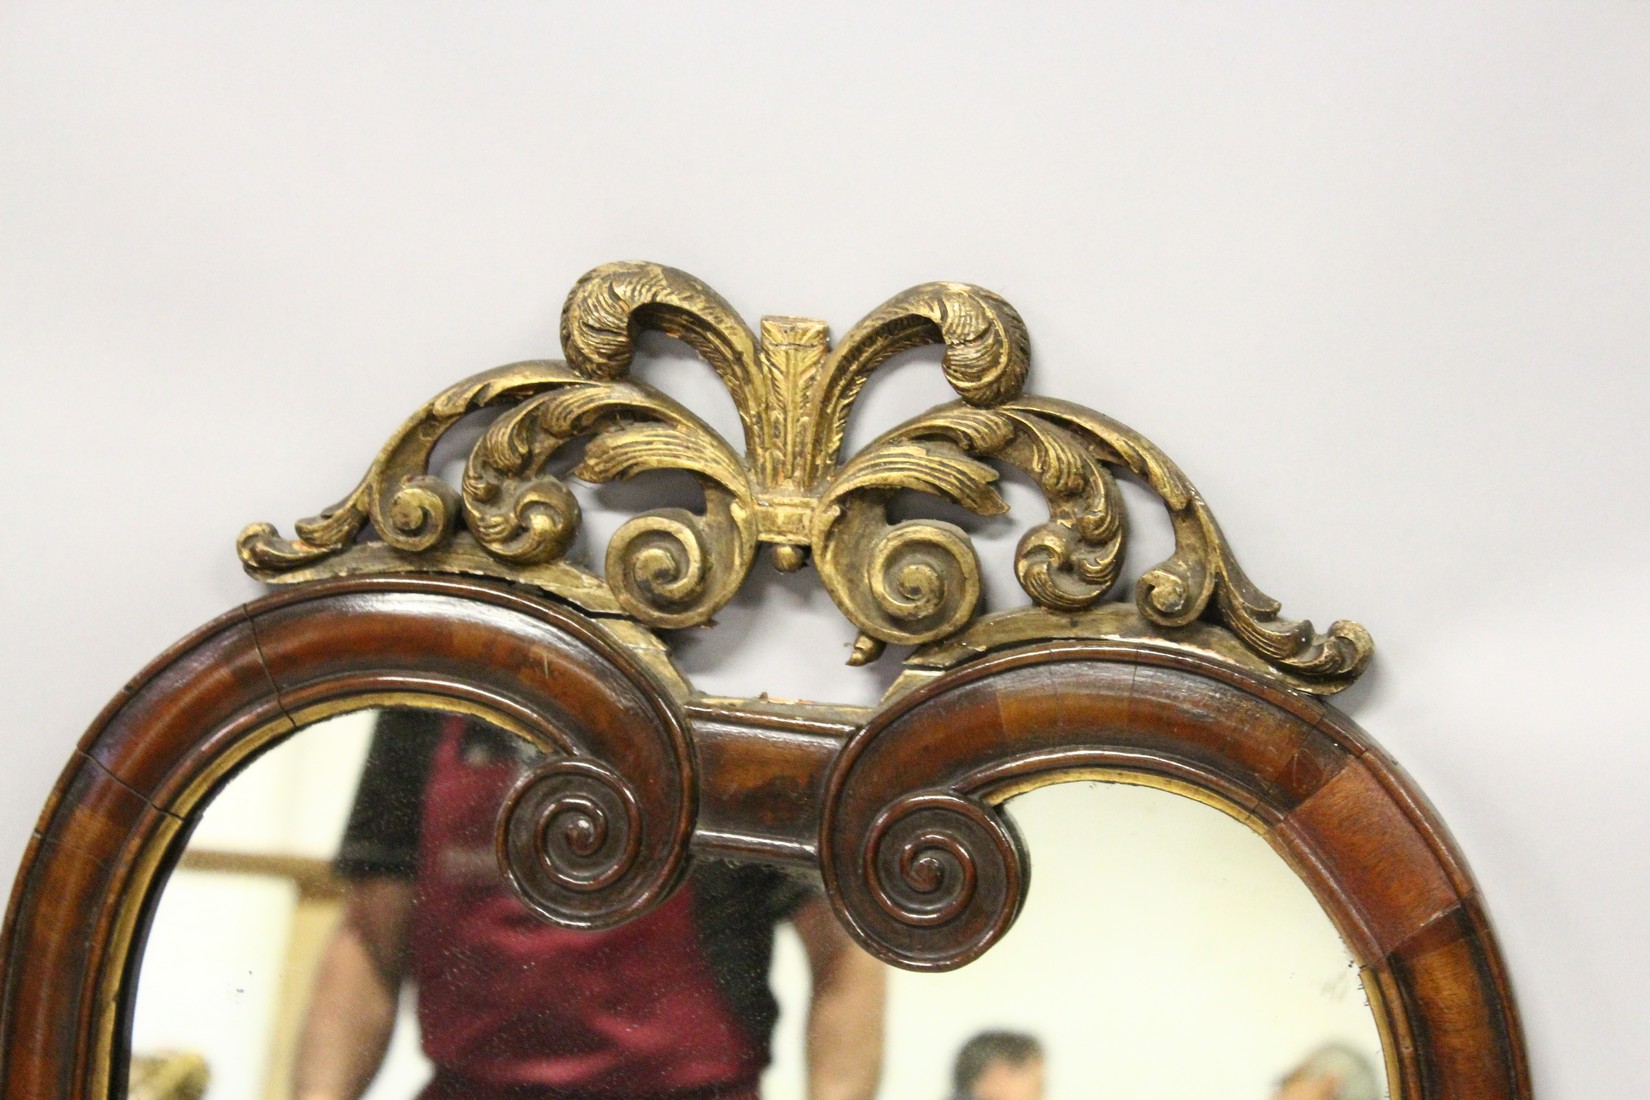 AN EARLY 18TH CENTURY WALNUT AND CARVED GILT UPRIGHT MIRROR 3ft 1ins high, 1ft 8ins wide. - Image 2 of 4